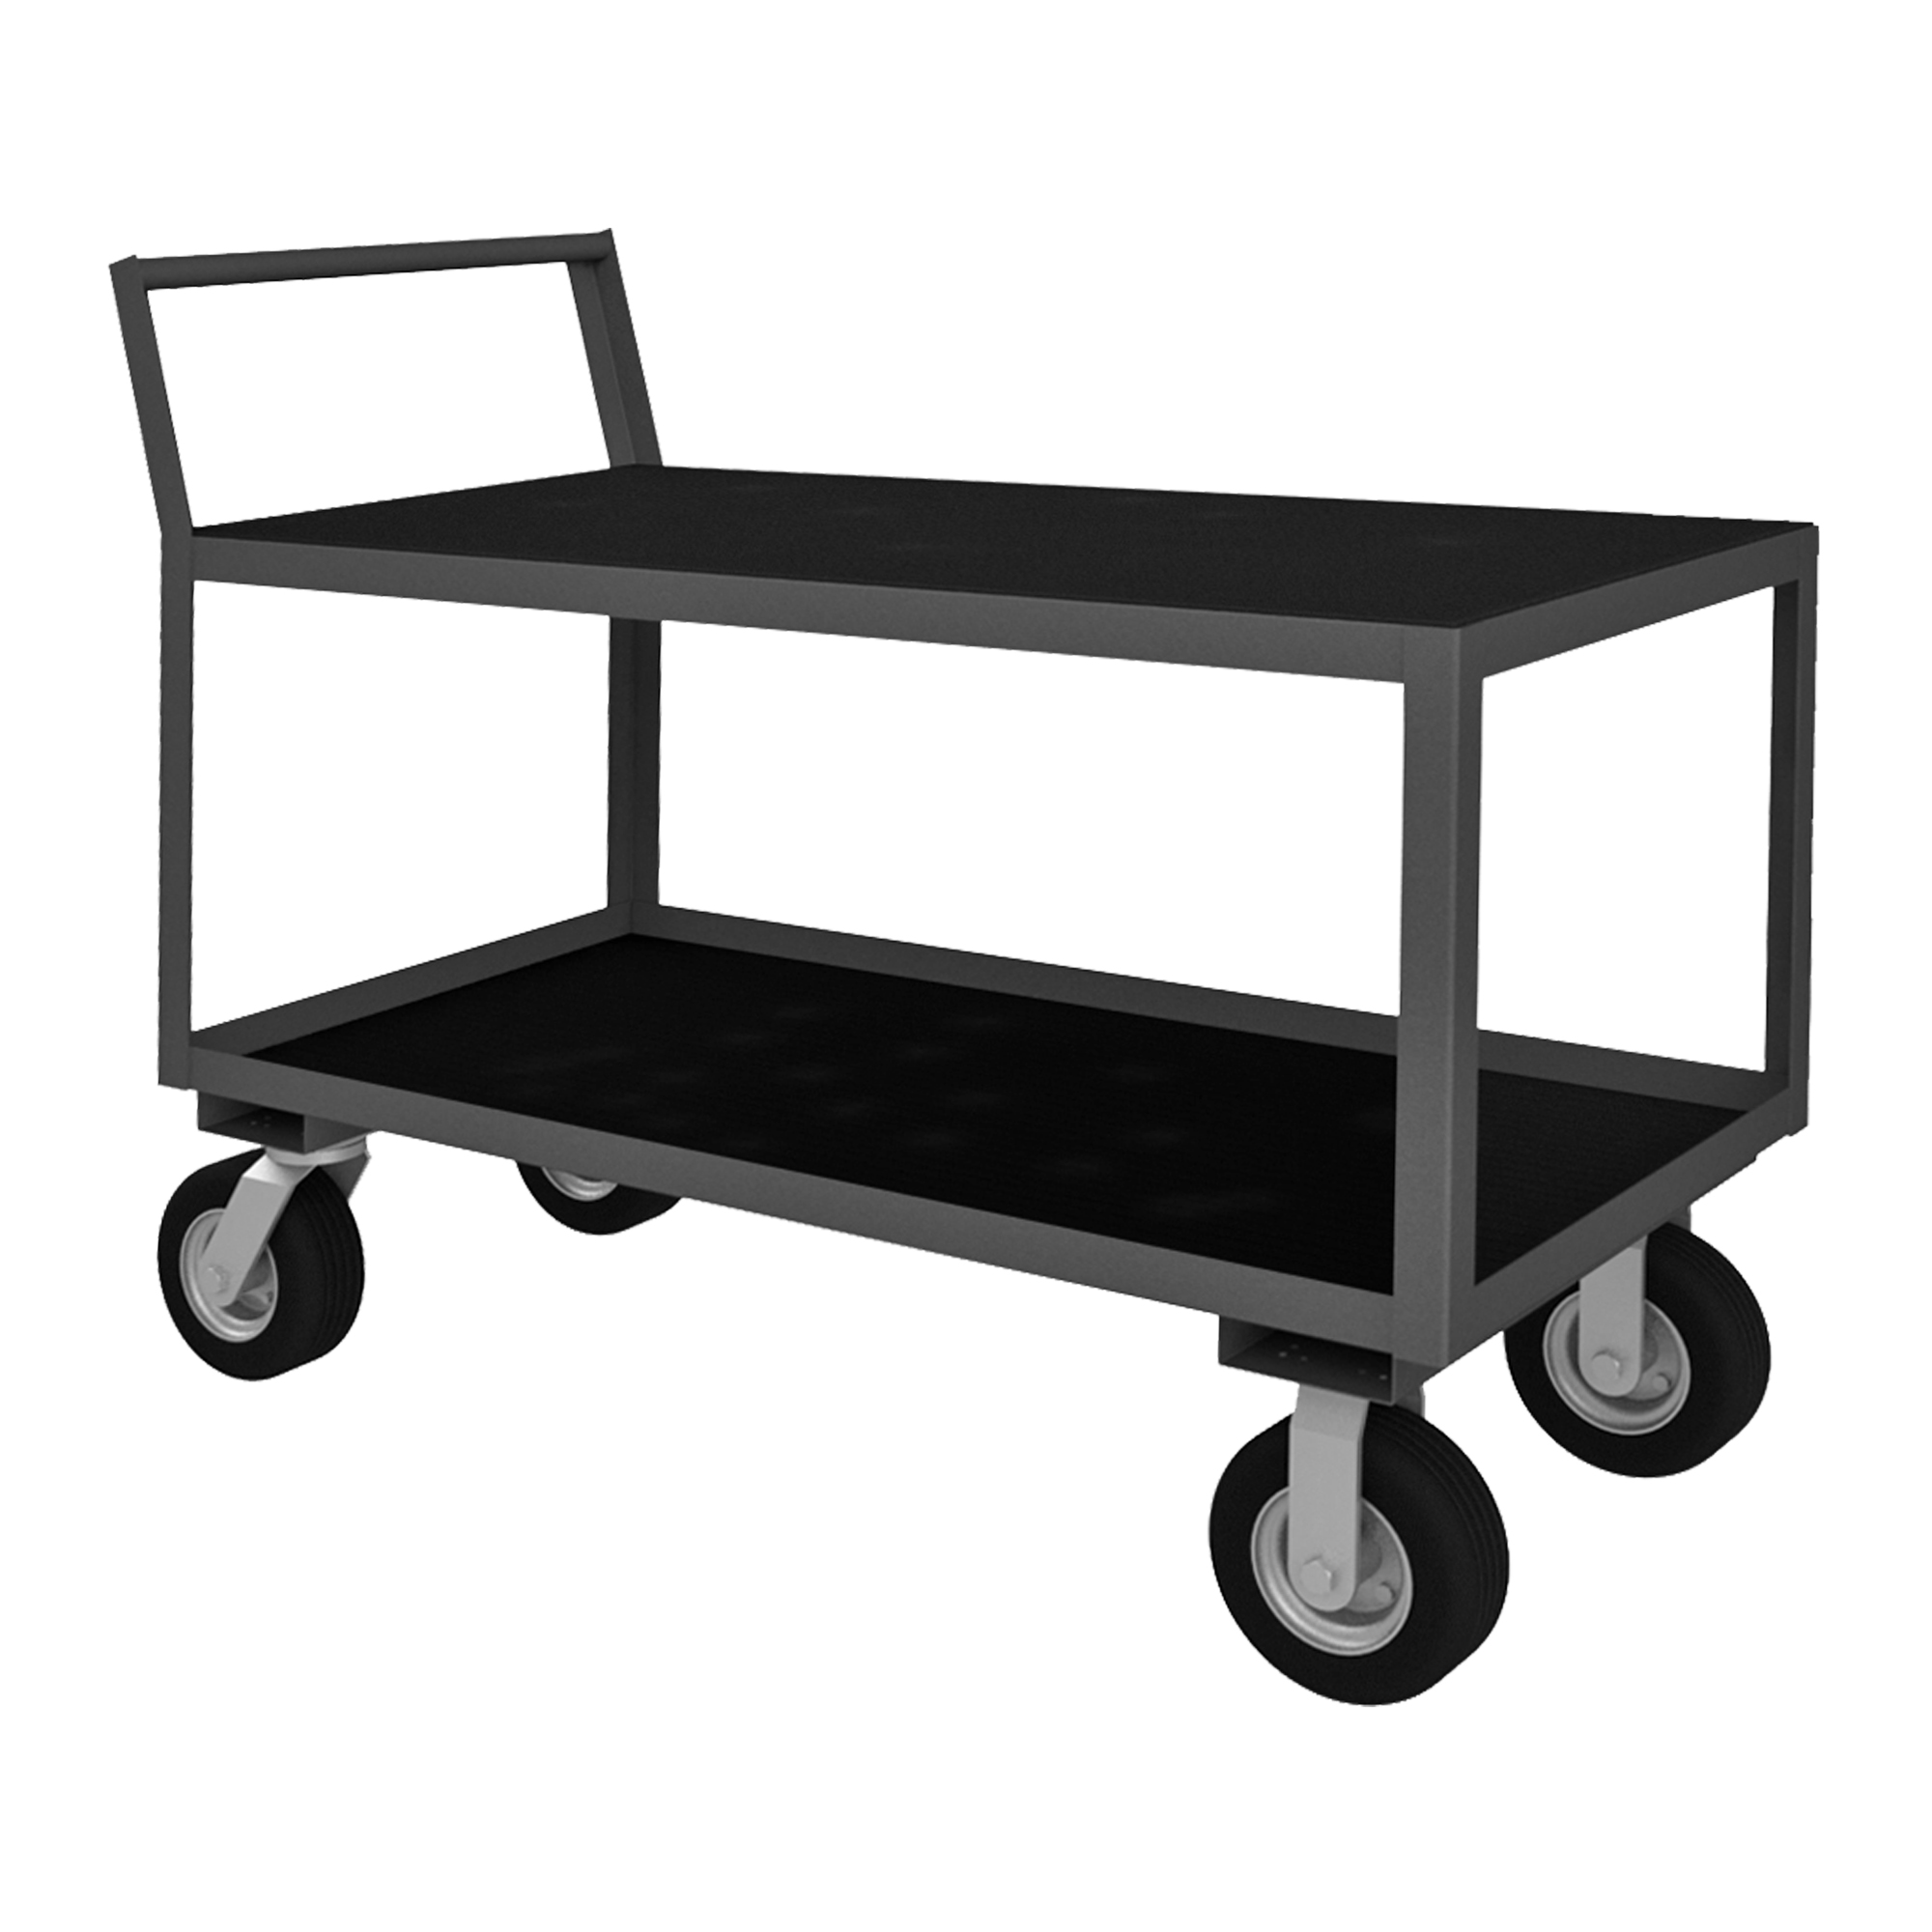 Instrument Cart With Pneumatic Caster, Low Profile, 2 Shelf, Size 30 x 48 Inch